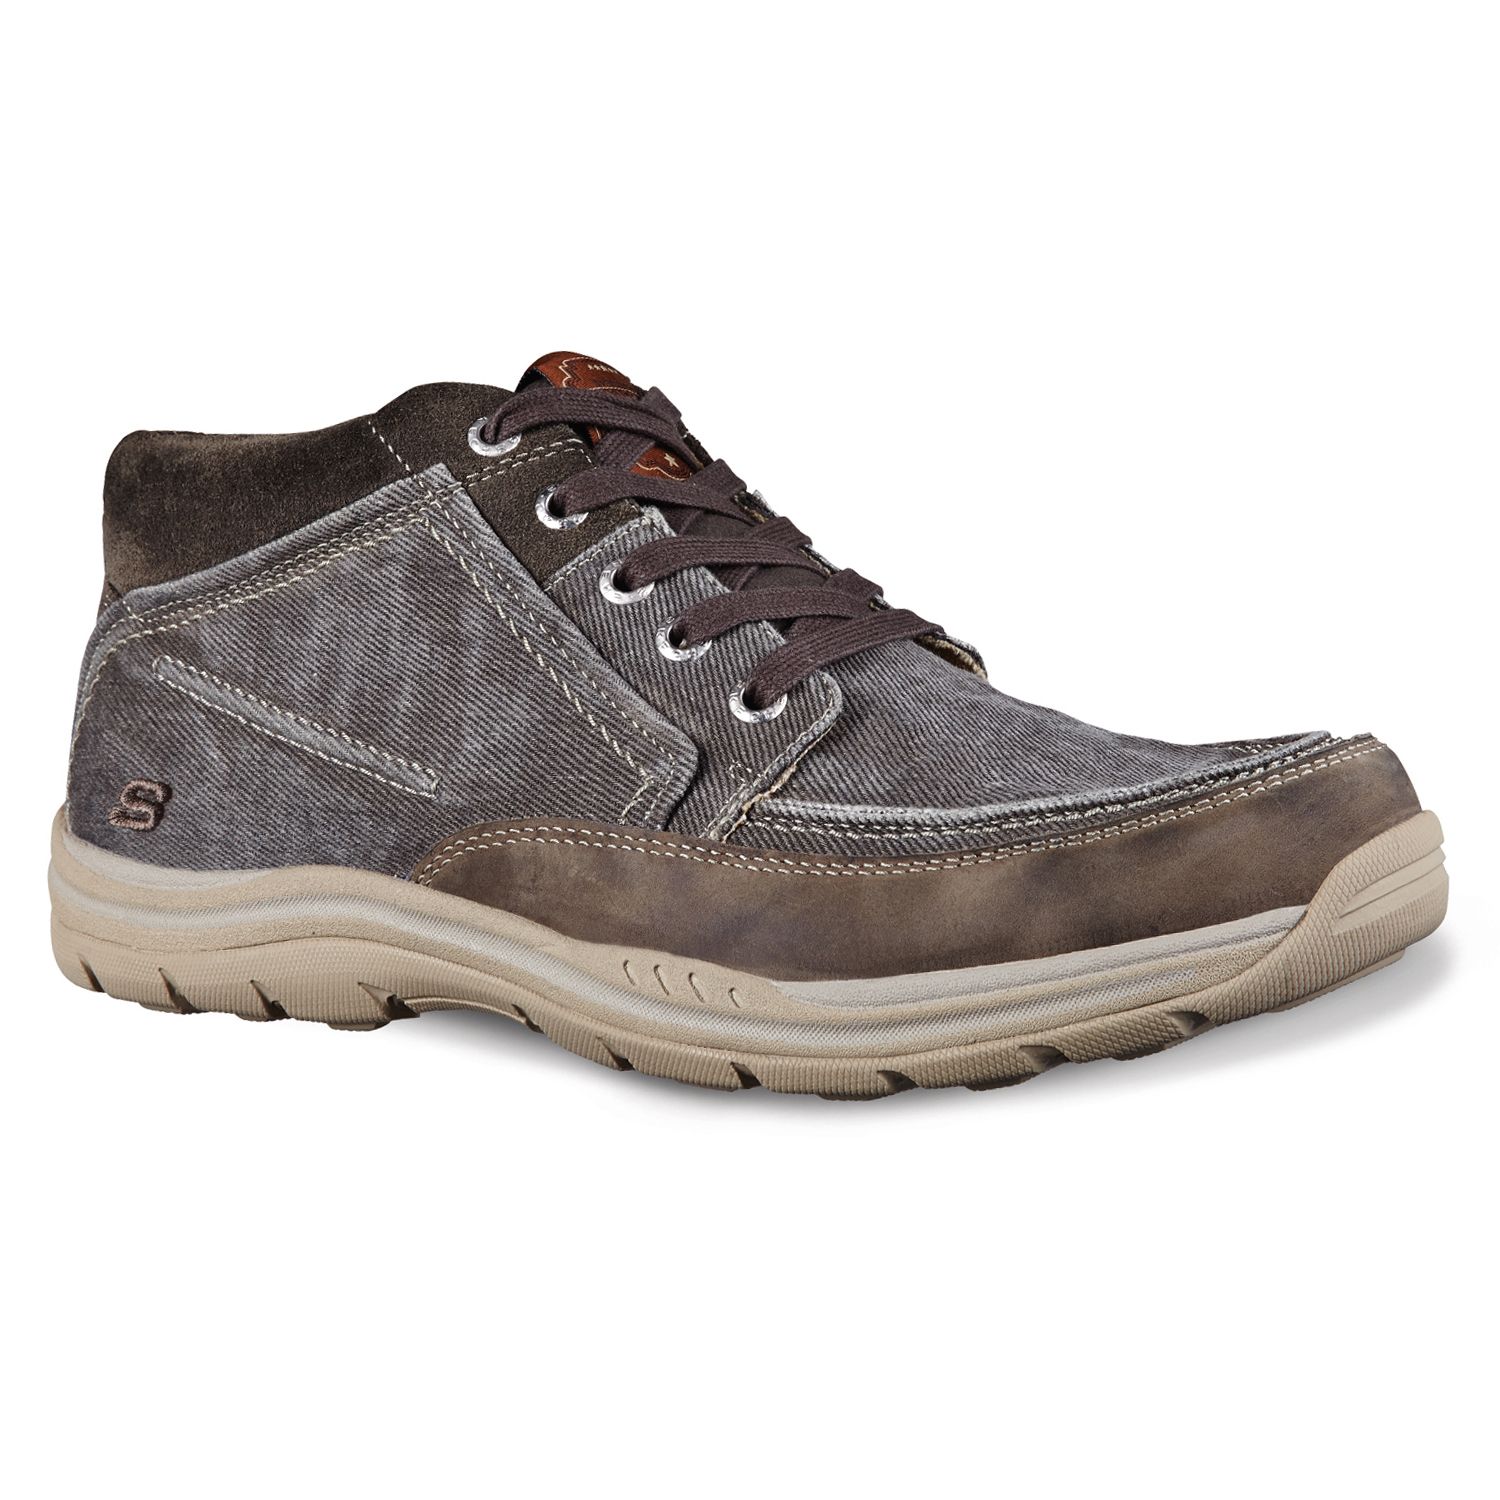 Skechers Relaxed Fit Bremo Men's Shoes